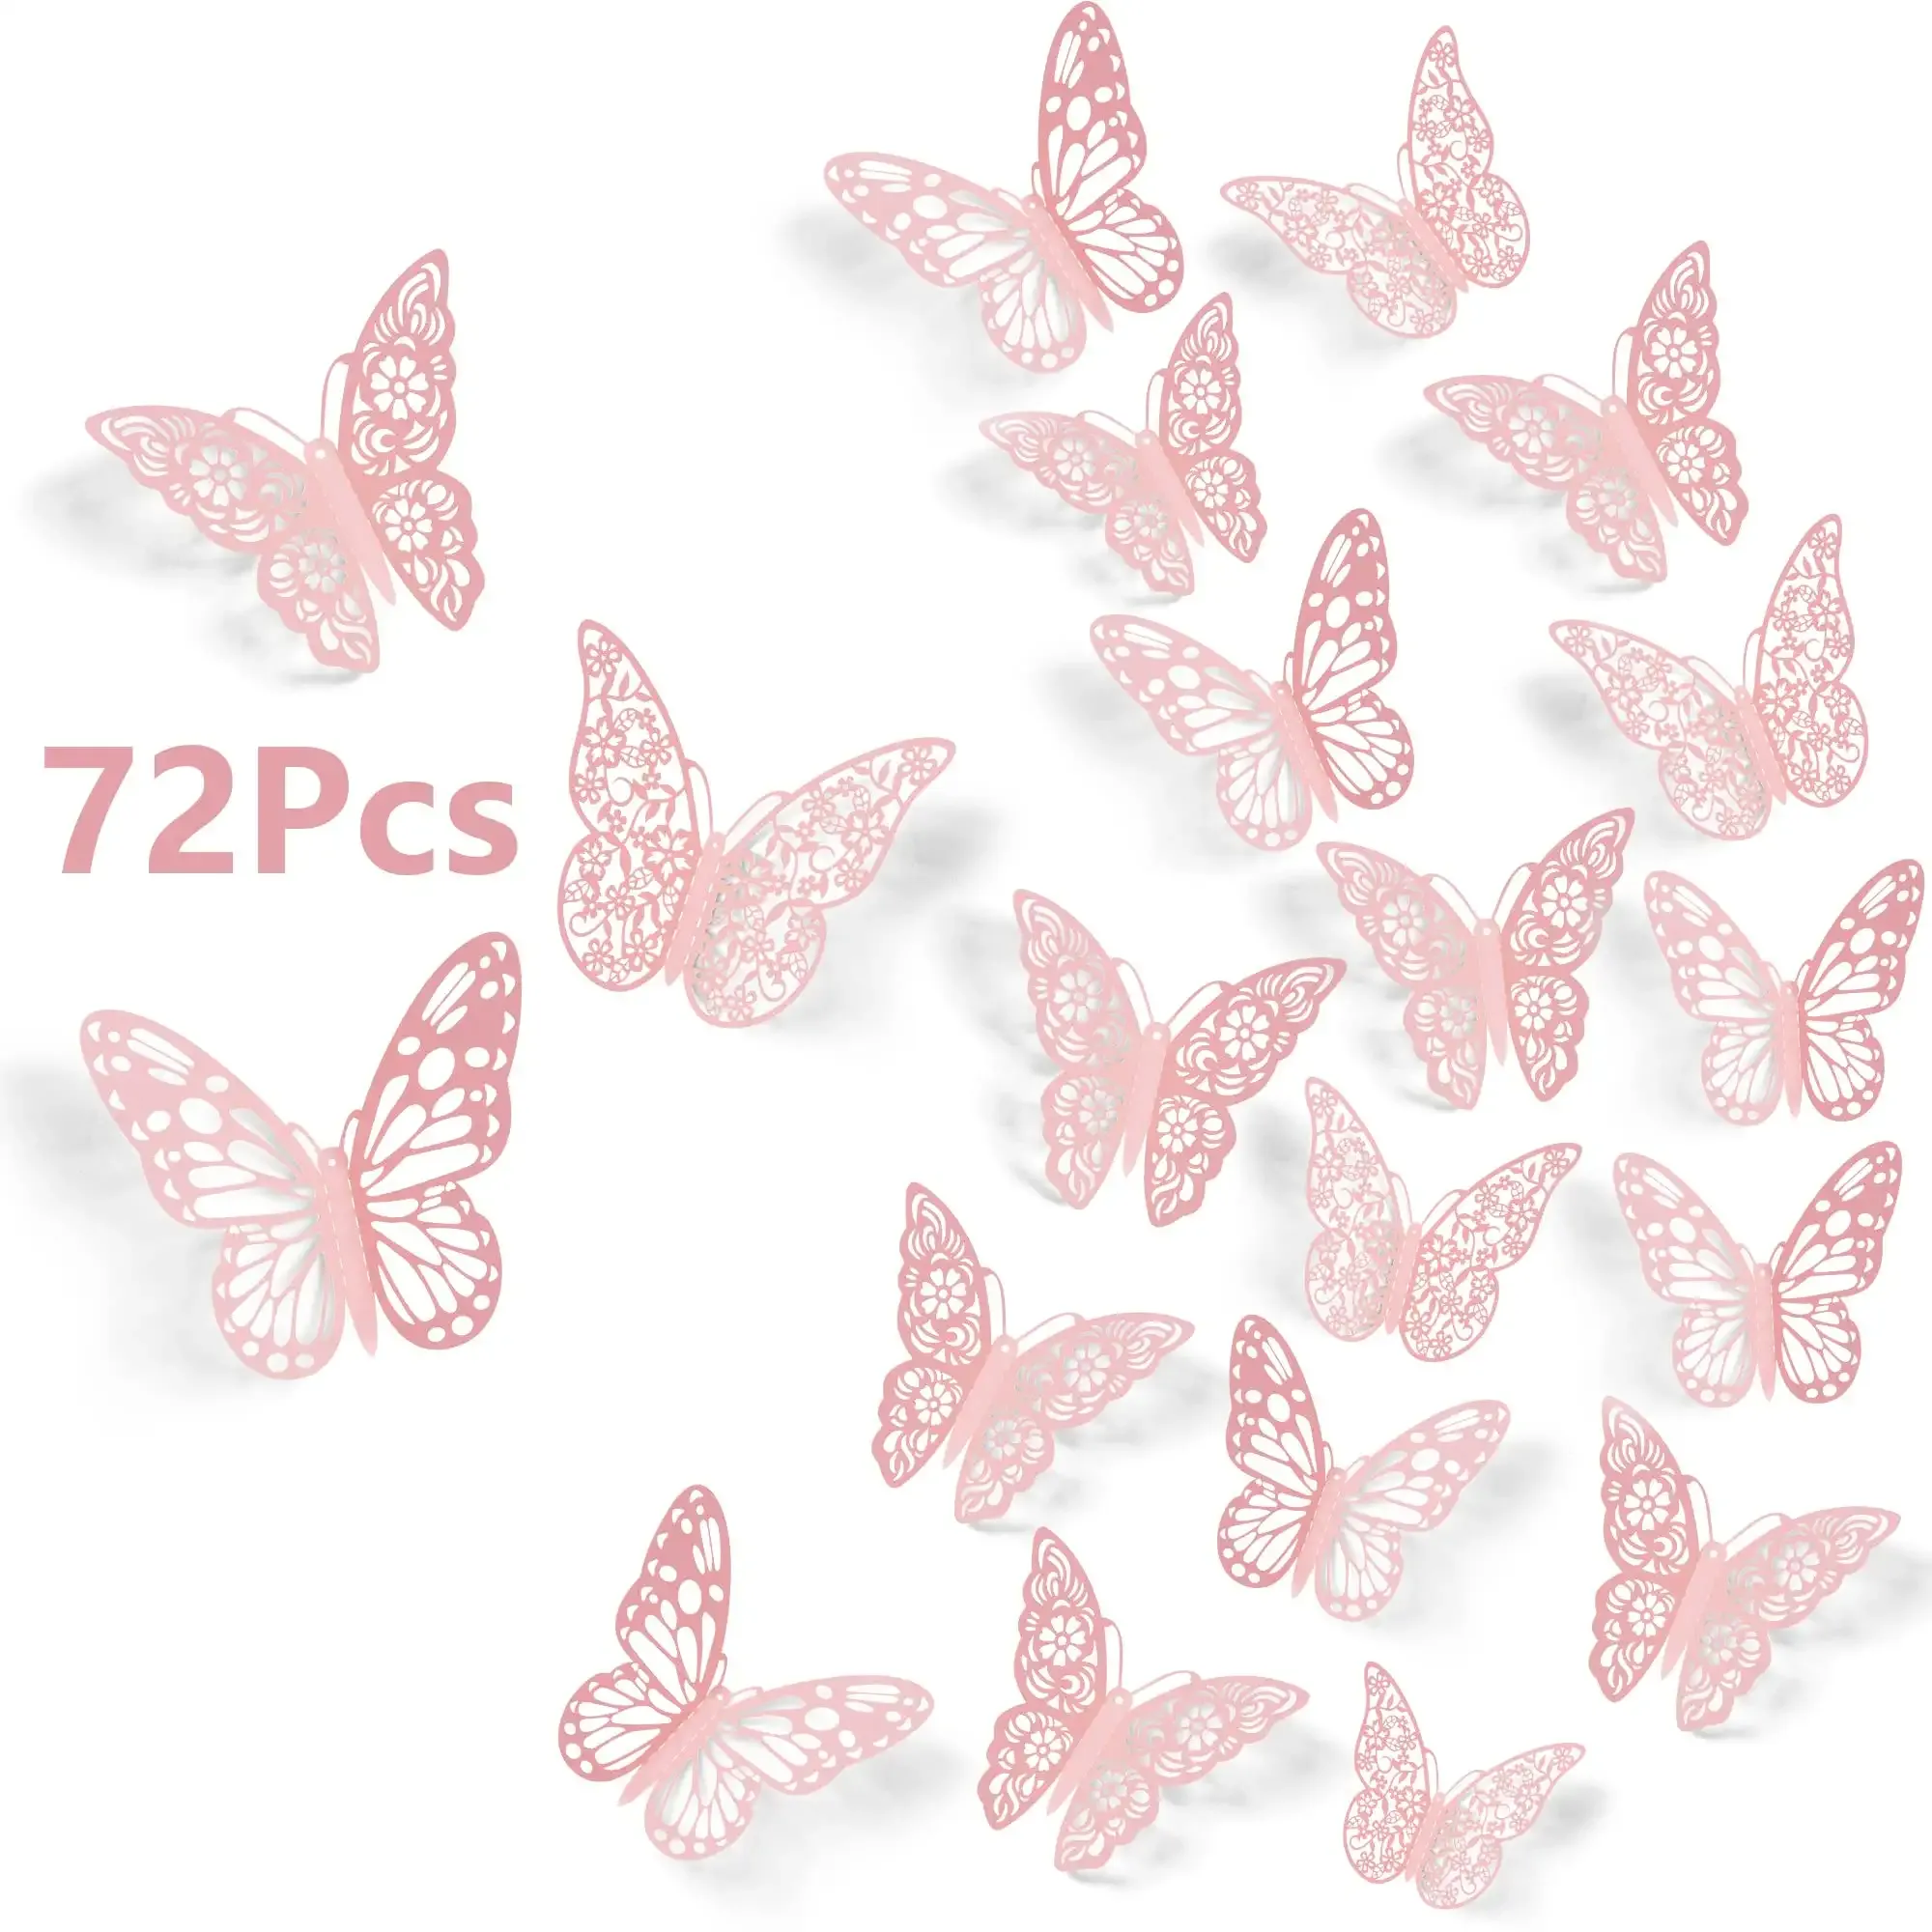 3d butterfly wall stickers decor butterfly decals diy decorative wall art cutouts crafts removable for room wedding flower party decorations 3 styles pink